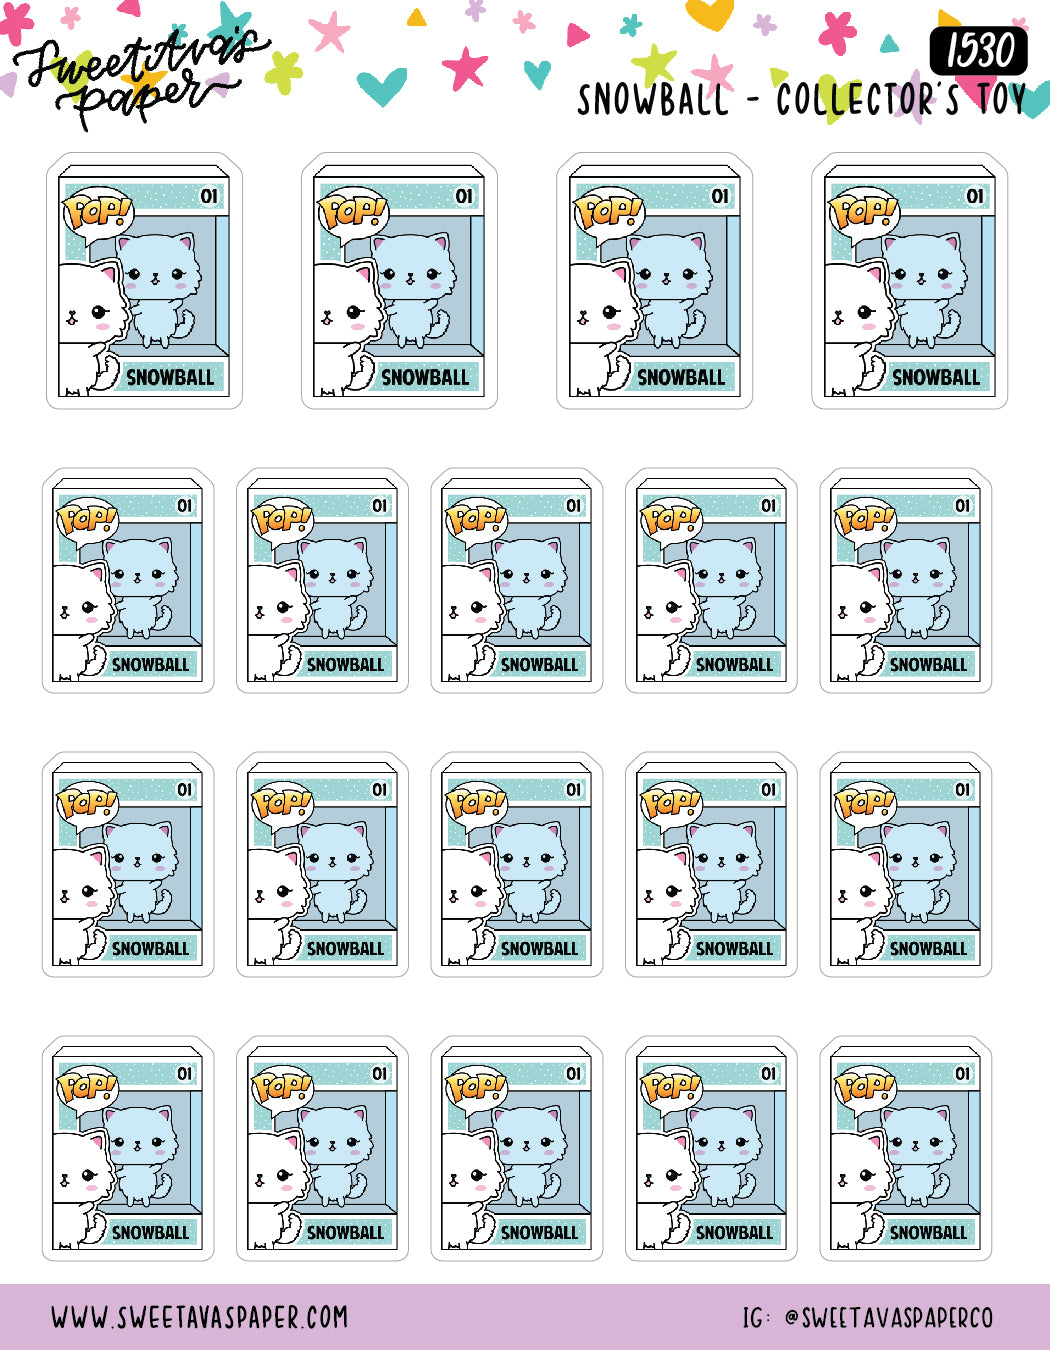 Snowball Cat Toy Figure Planner Stickers - Snowball The Cat - [1530]